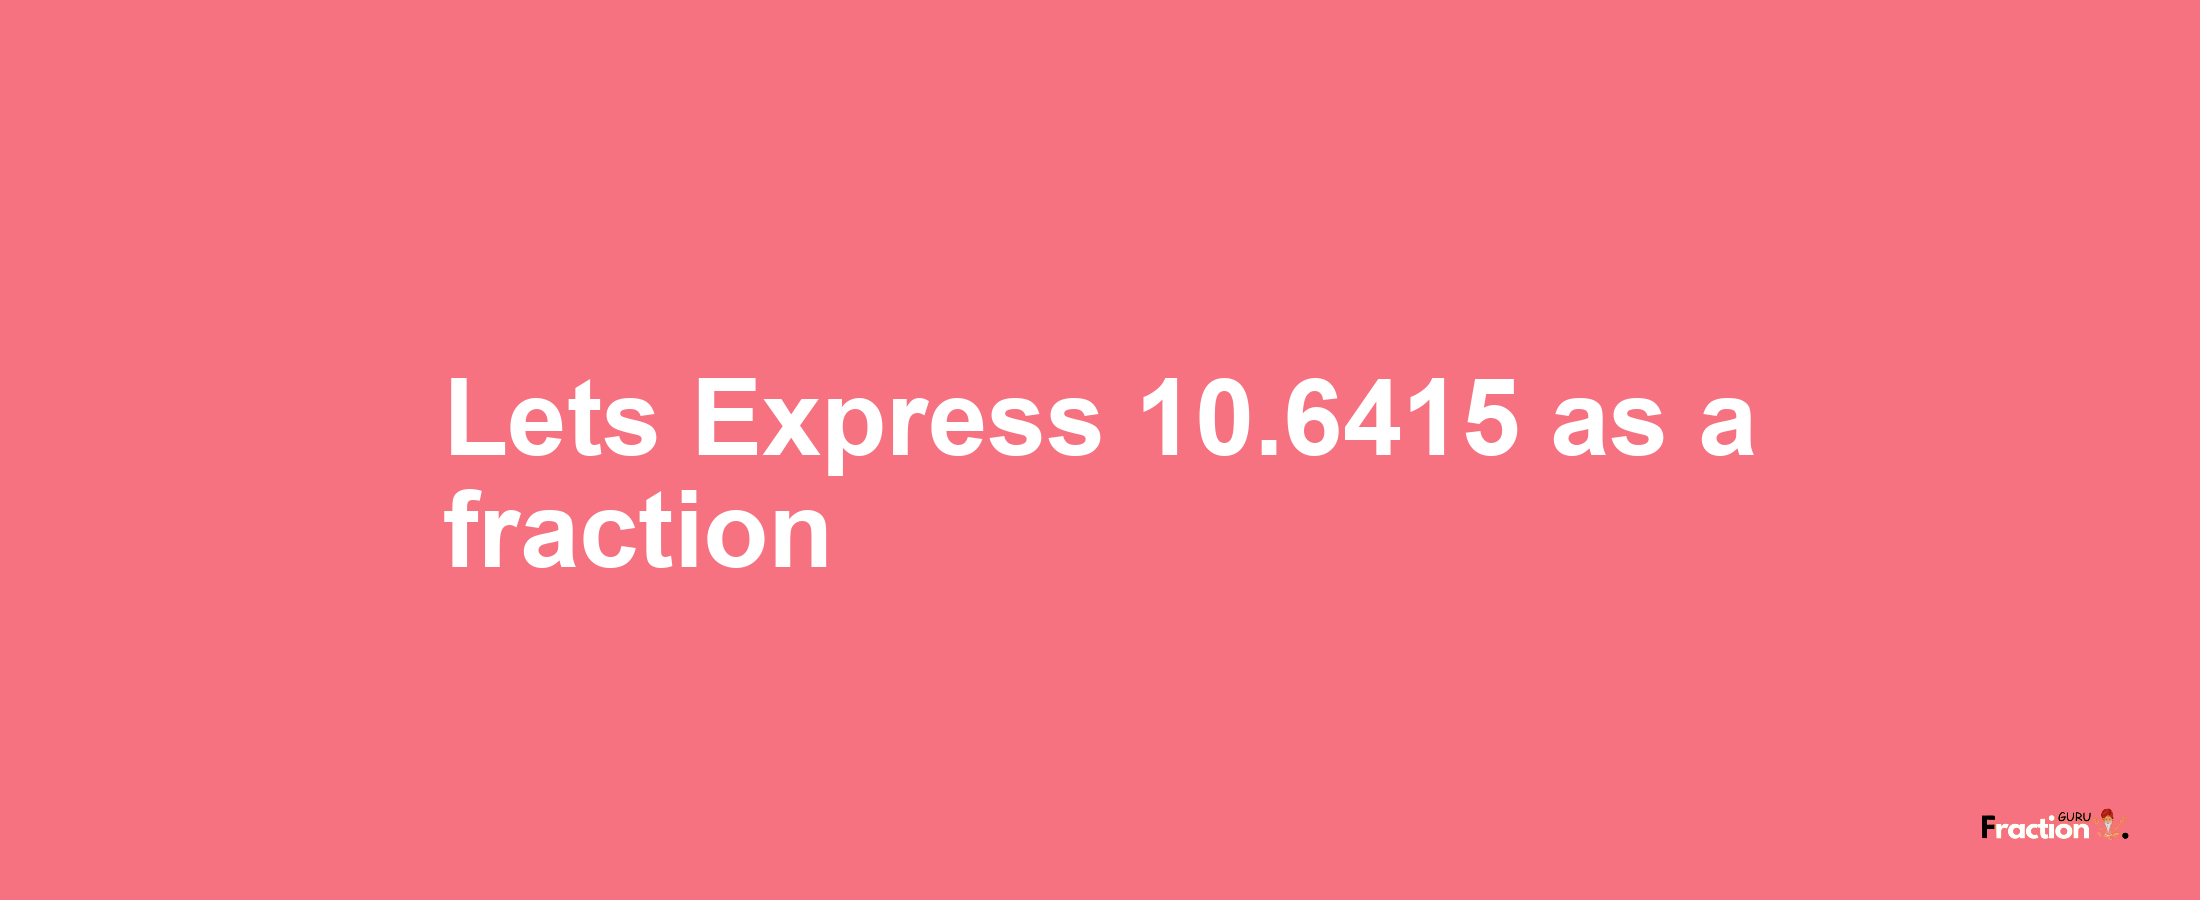 Lets Express 10.6415 as afraction